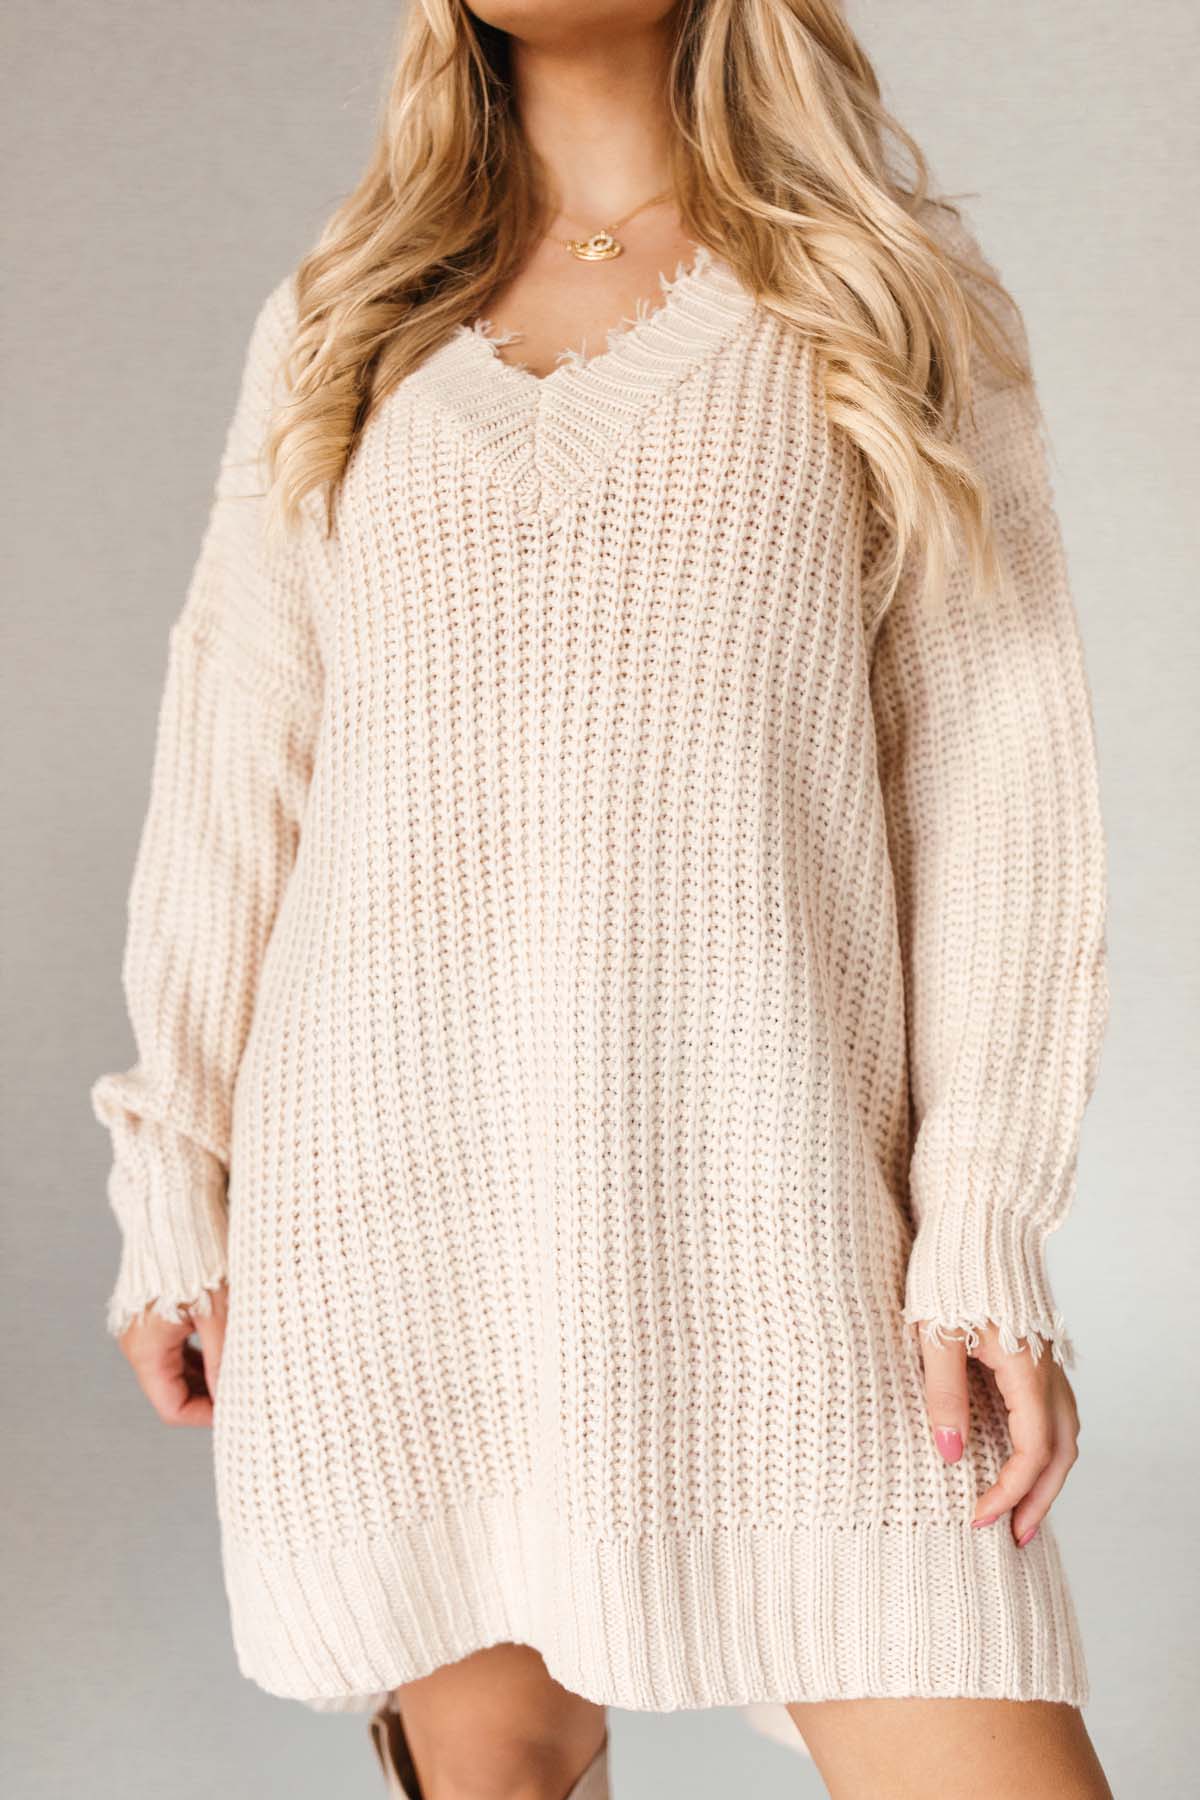 Distressed Knit Tunic, alternate, color, Taupe